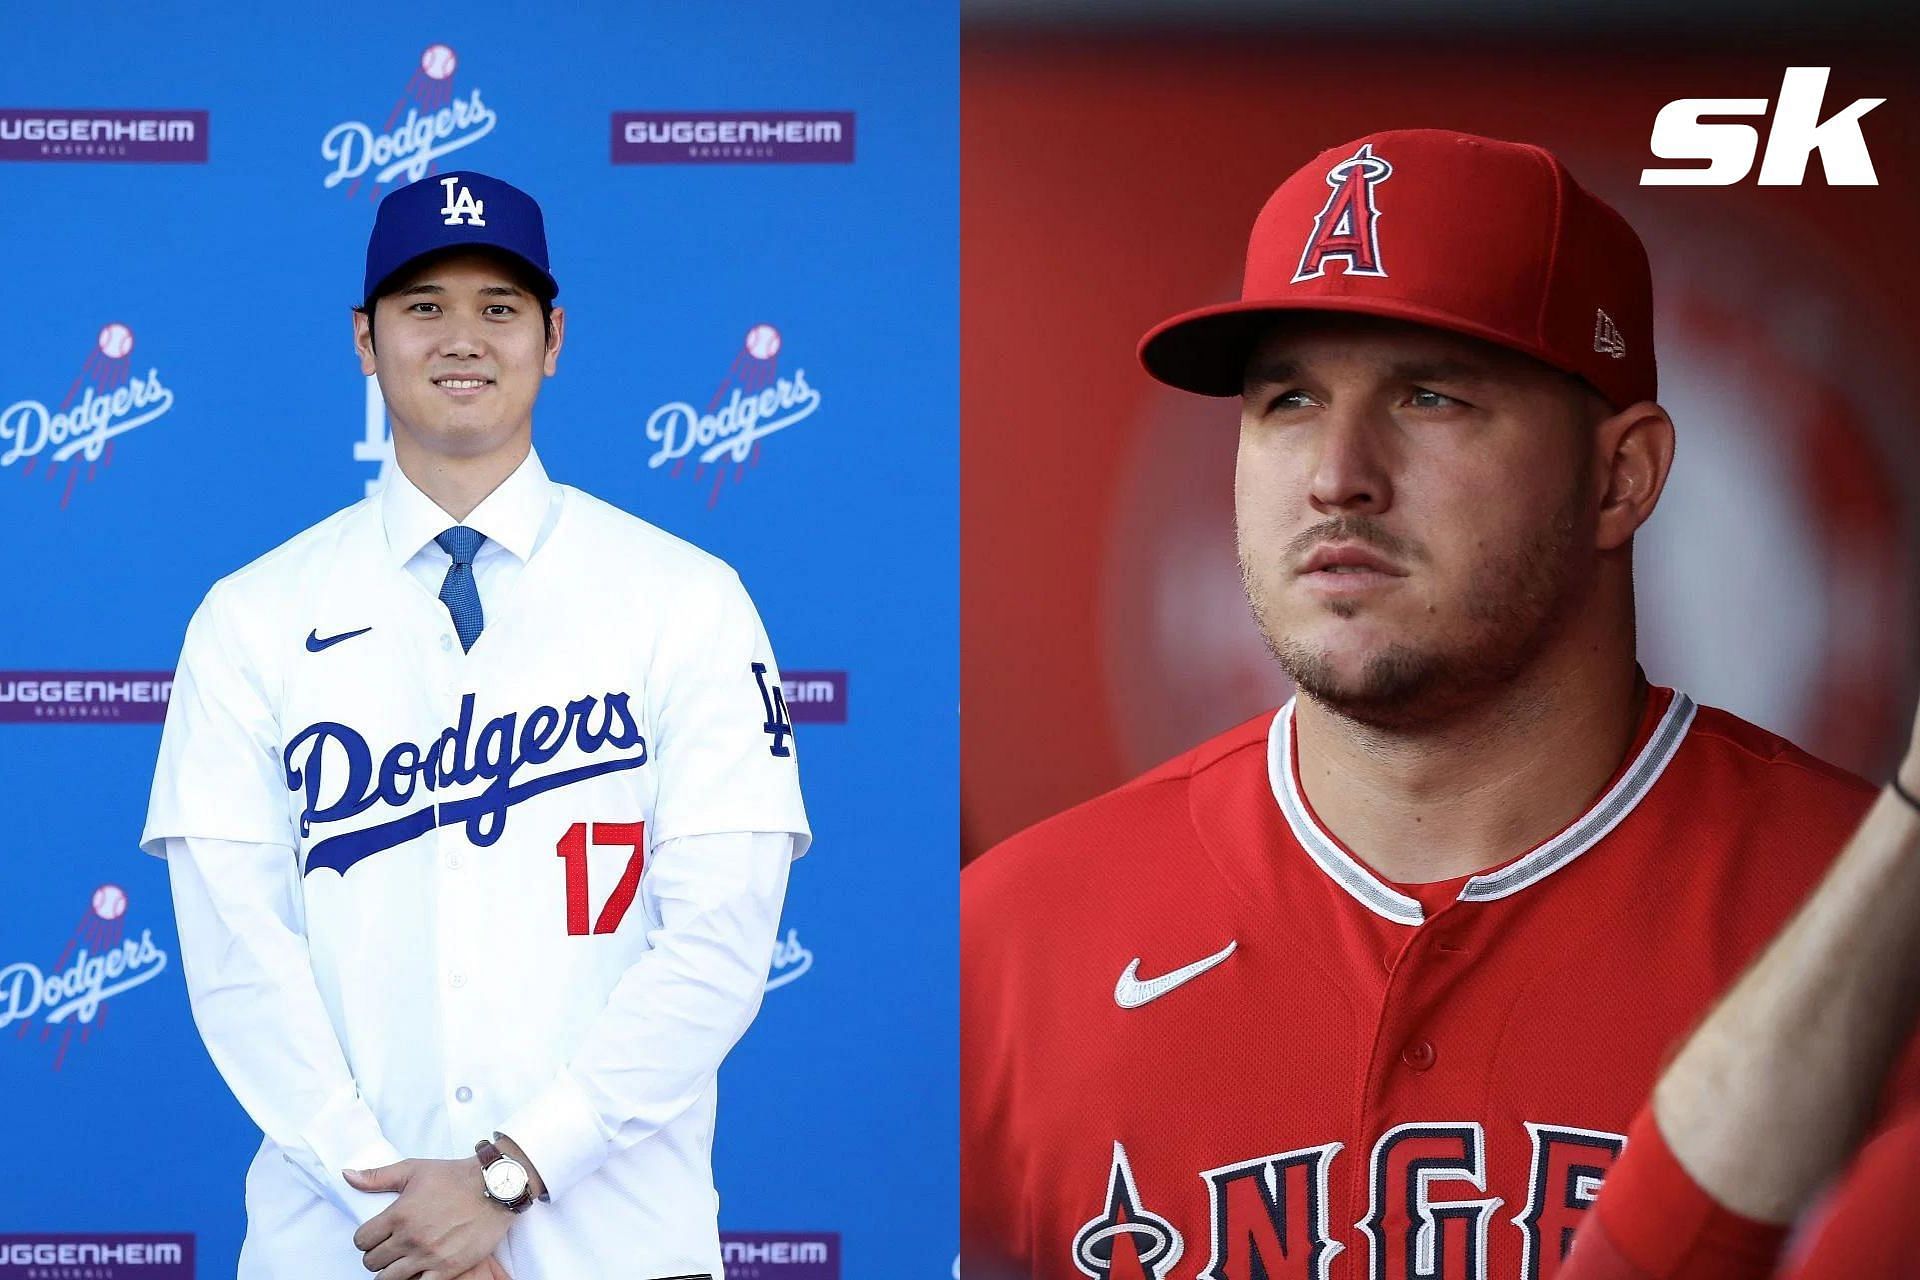 Mike Trout (left) will be on the opposing team against Shohei Ohtani (left) for the first time since the WBC